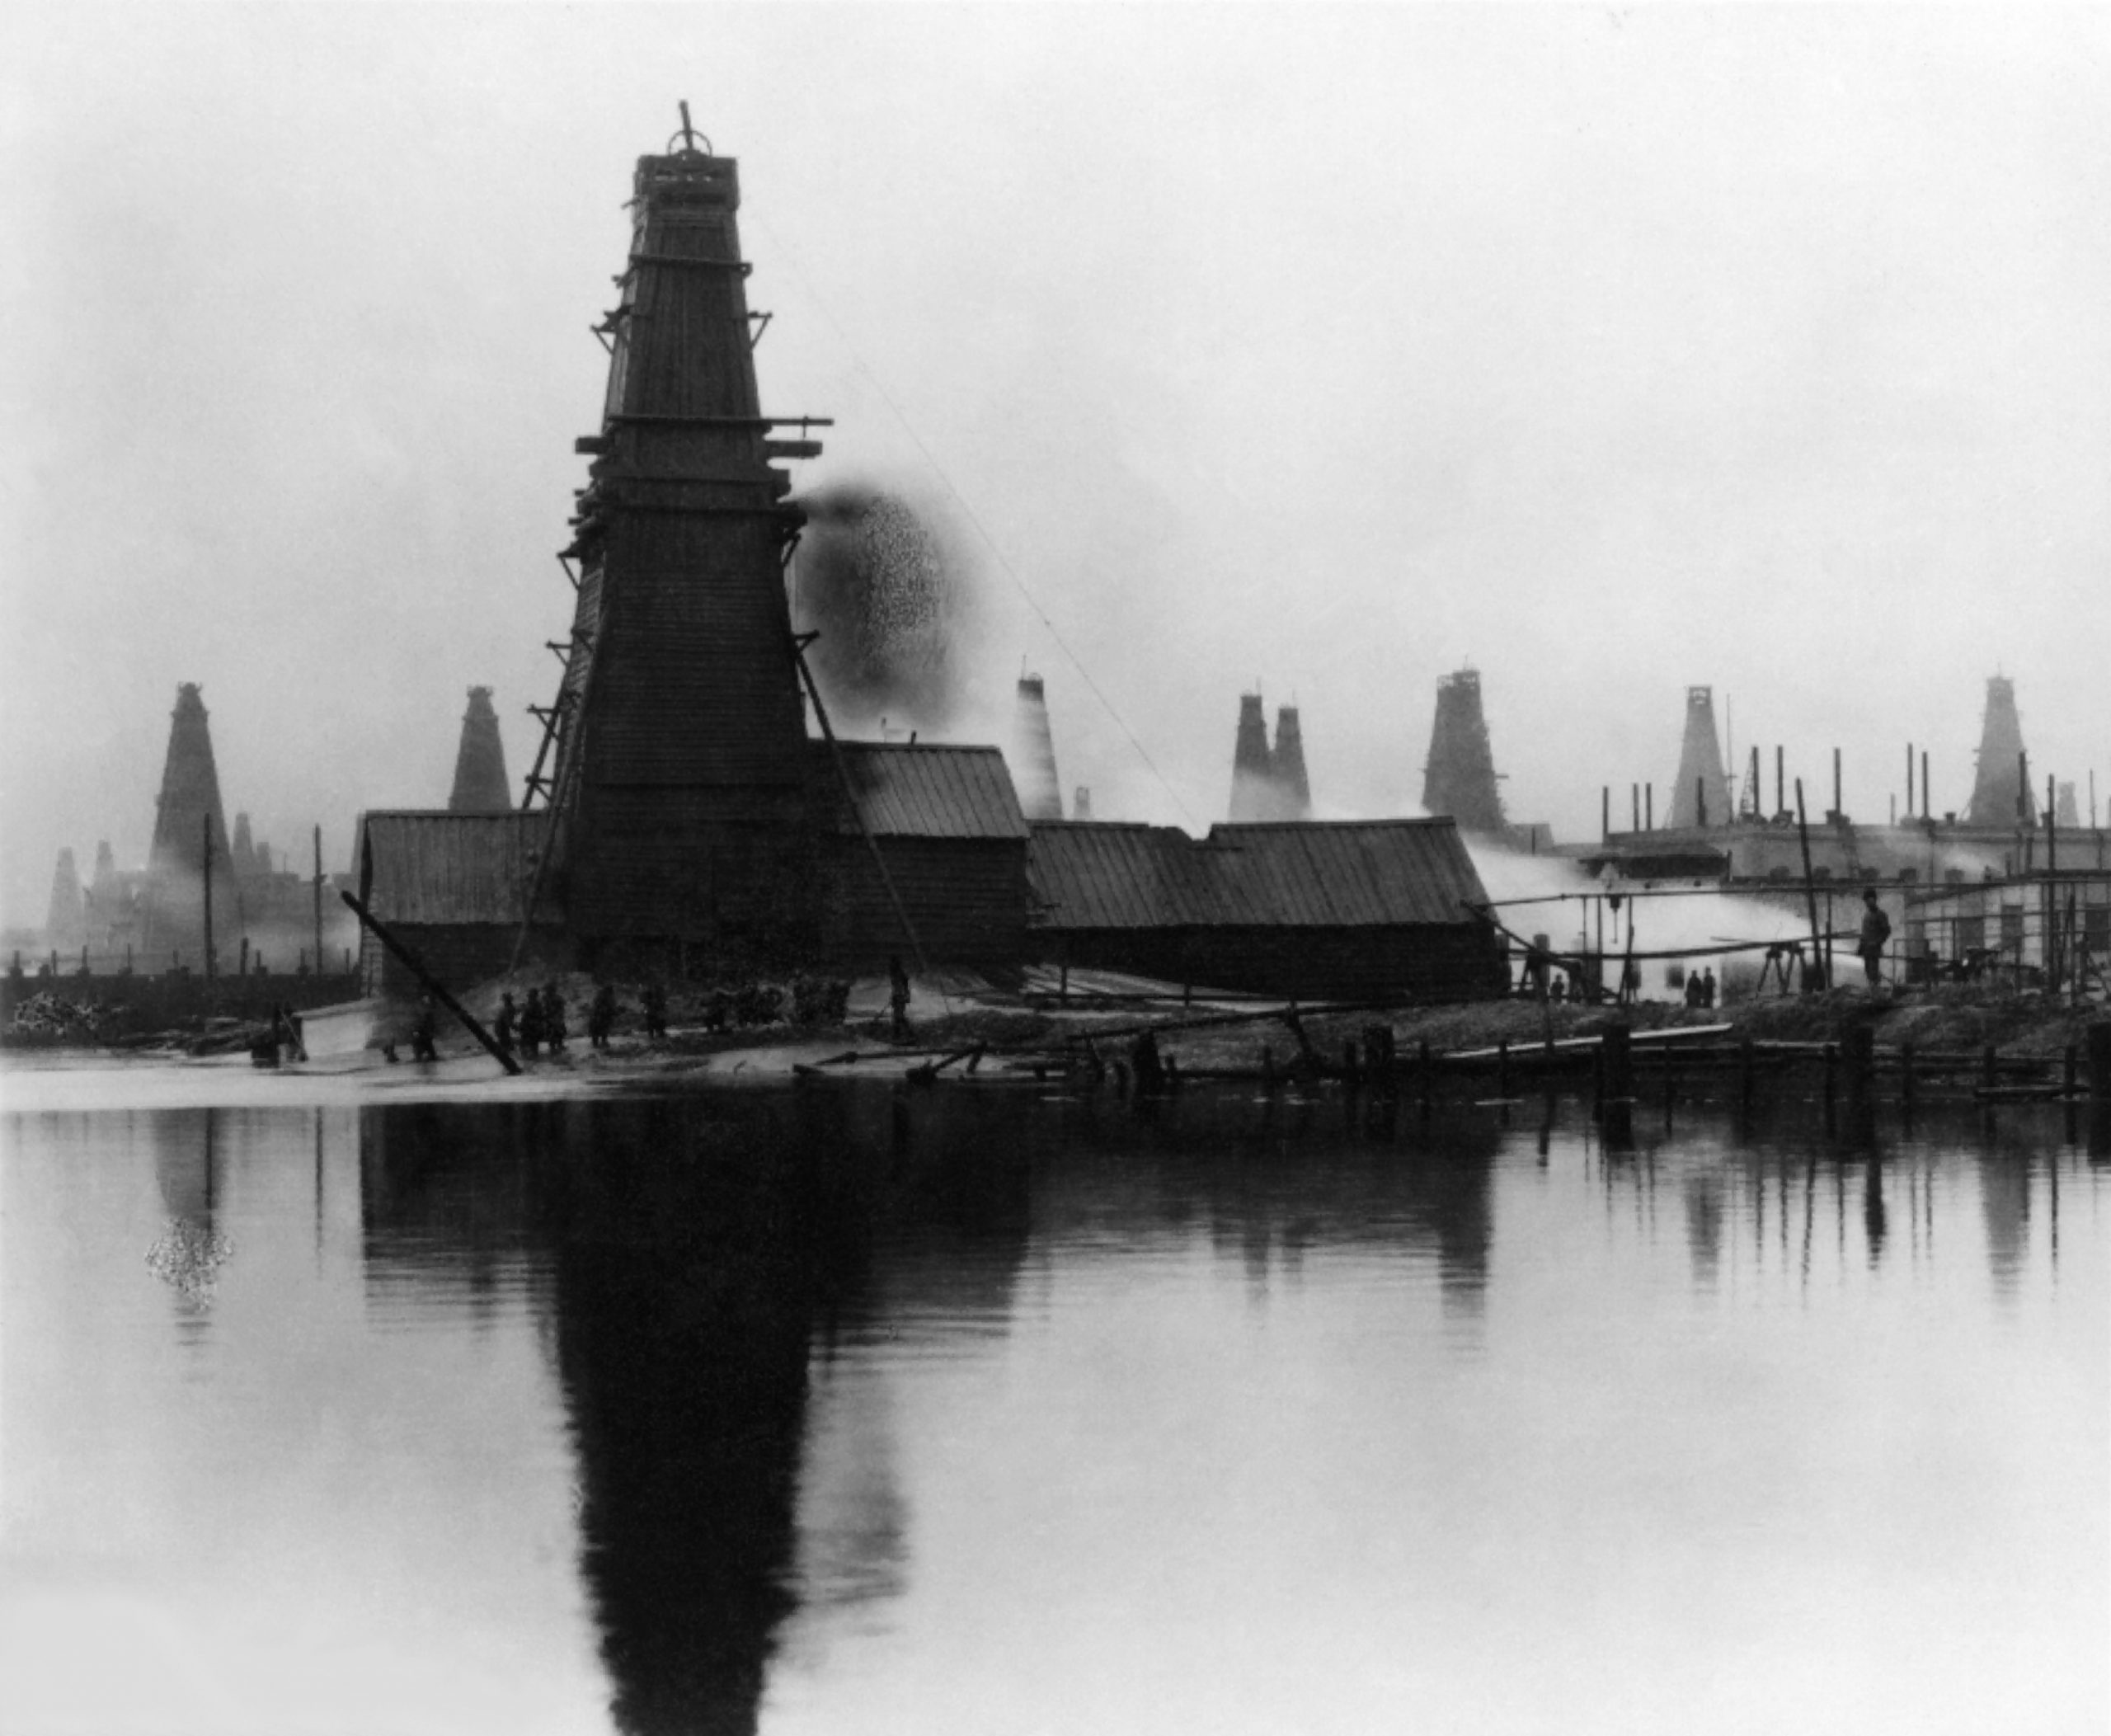 At Ludvig Nobel’s engineering works, steam machines were adapted and improved to meet the oil industry’s need for heavy machines in the oil rigs.